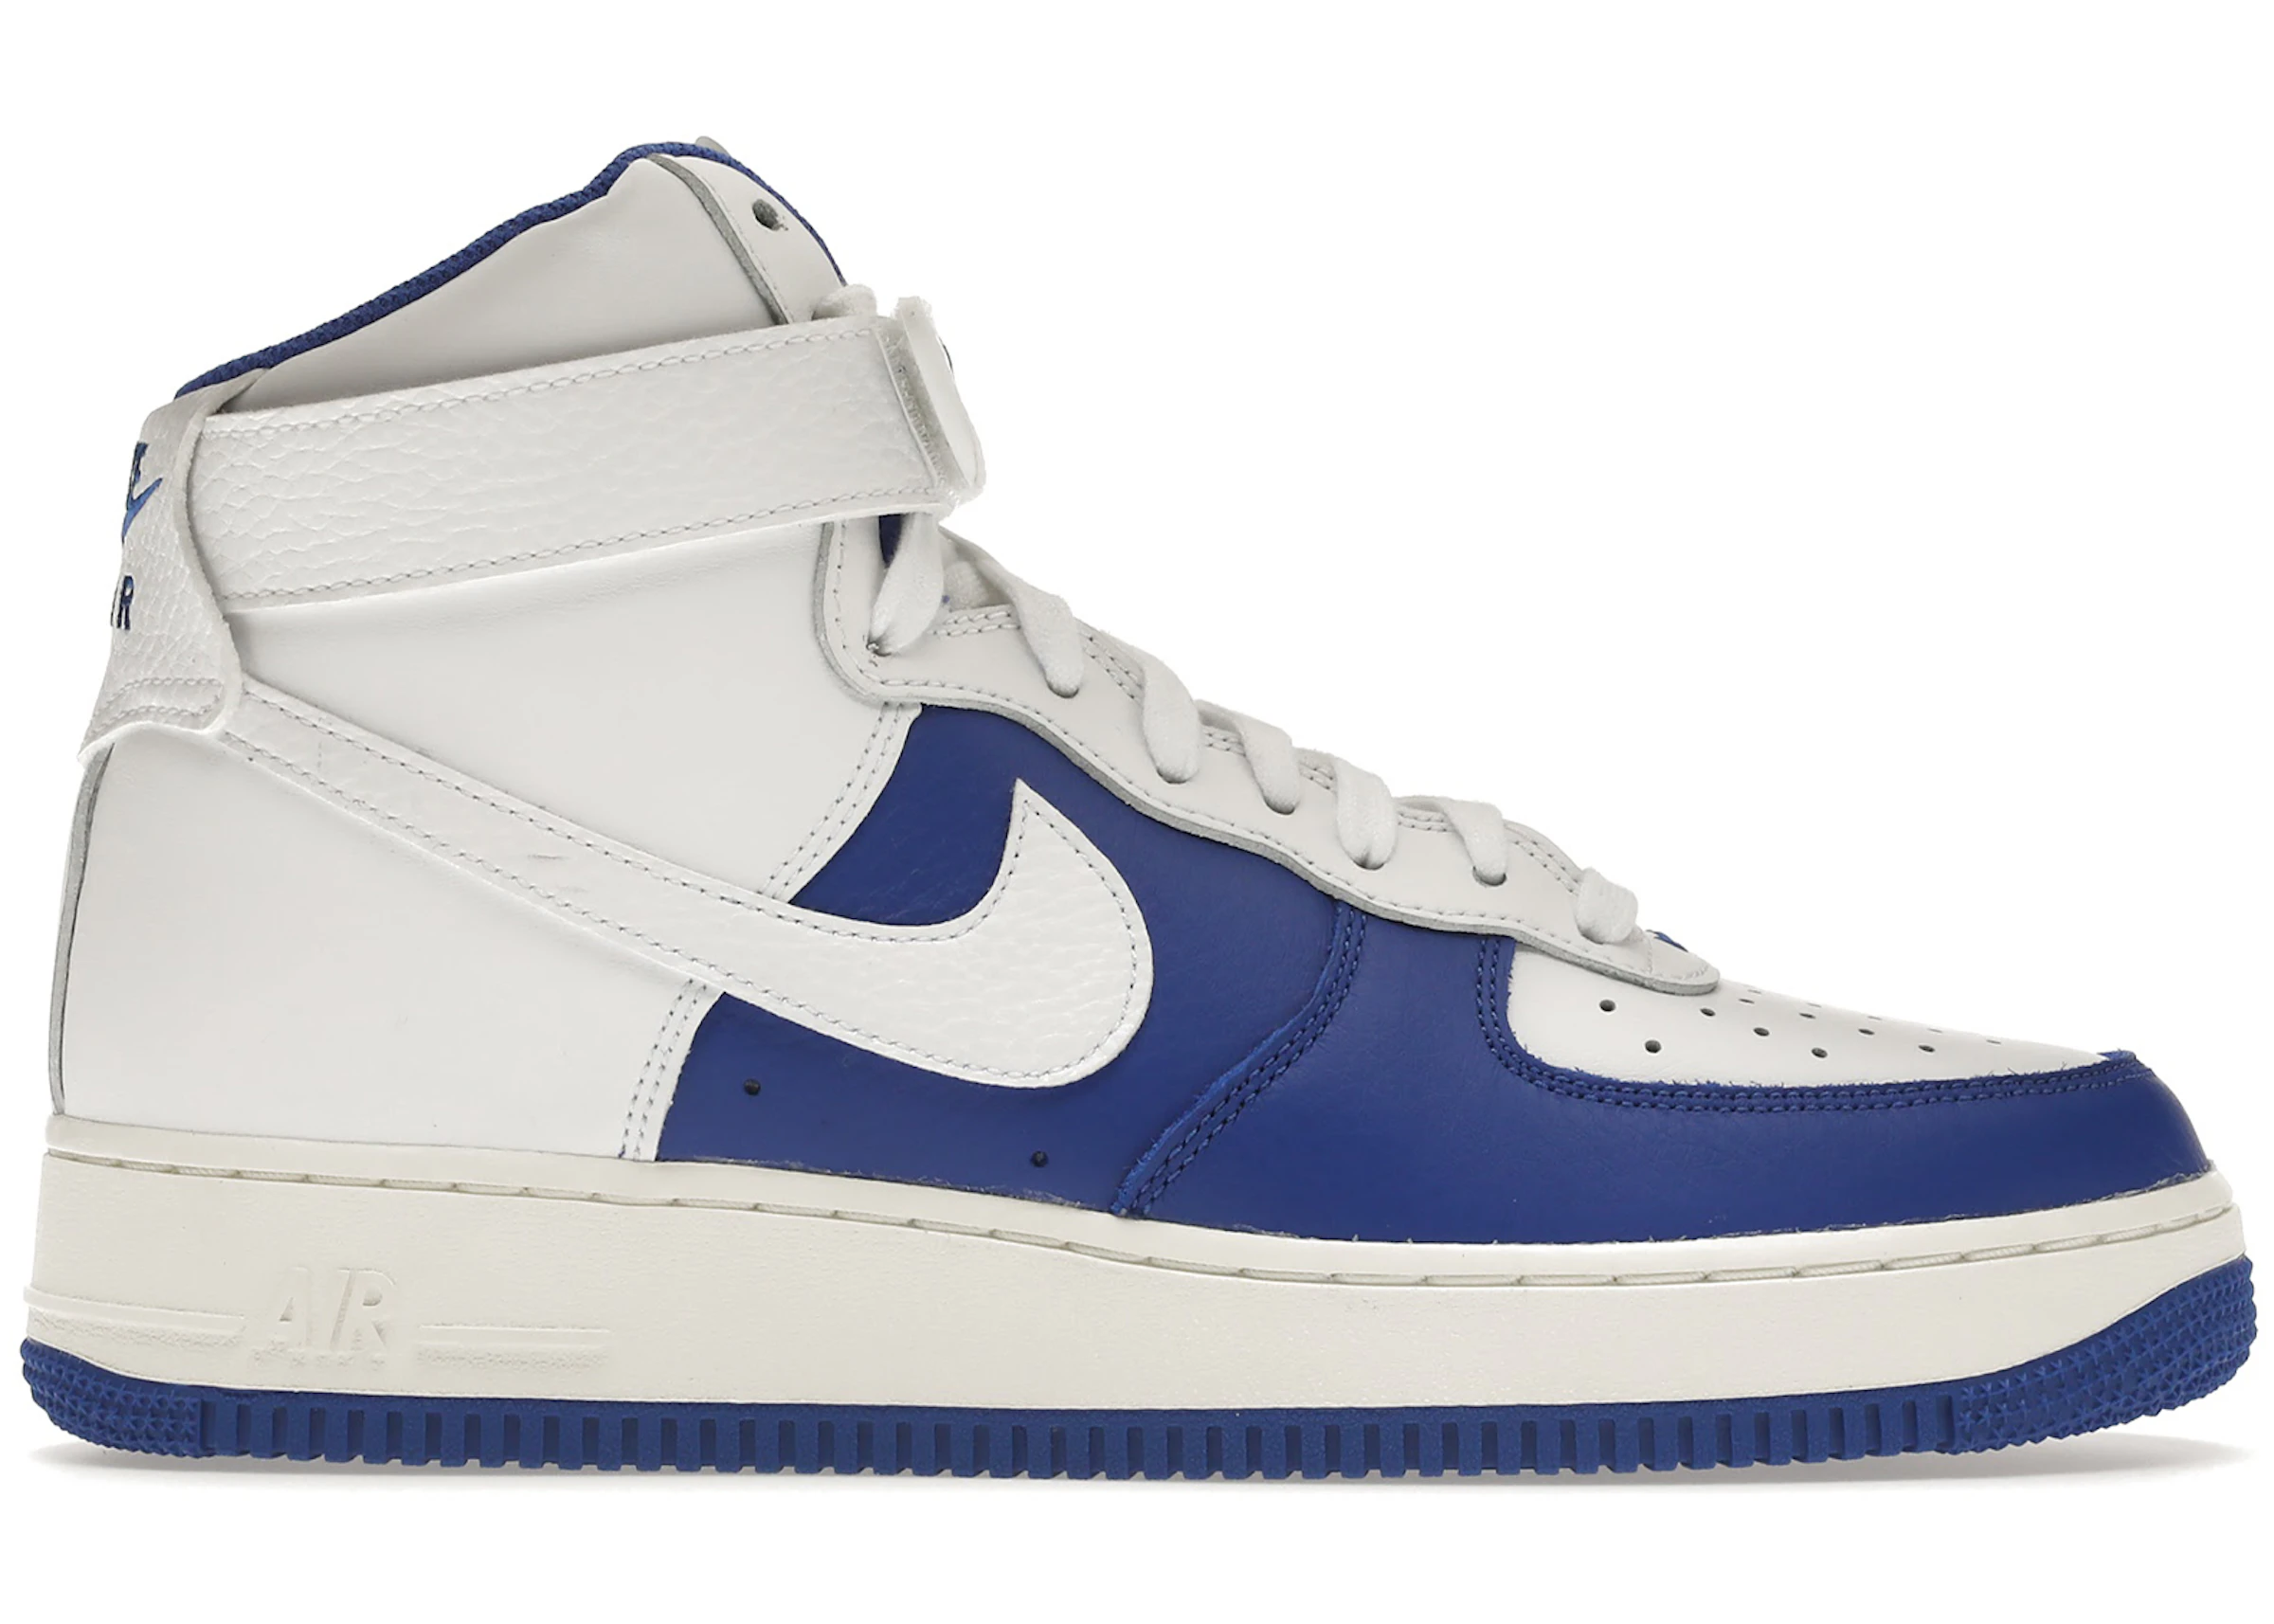 Automatic Glossary one Nike Air Force 1 High '07 LV8 NBA 75th Anniversary Hyper Royal - DC8870-100  - US